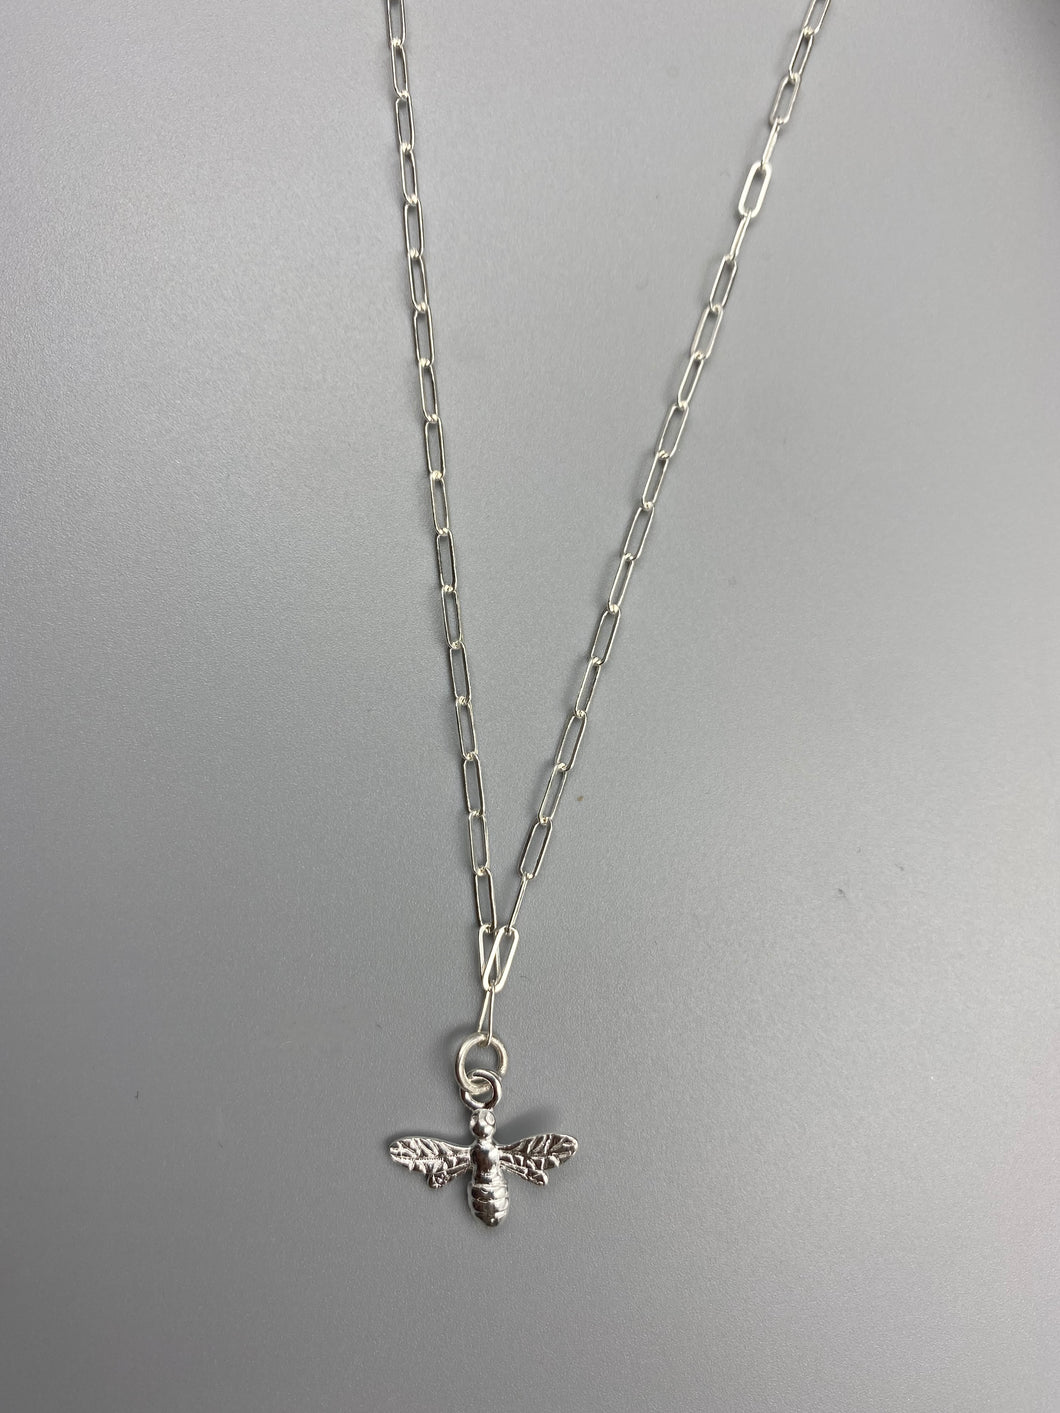 Bee charm skinny trace chain necklace in Sterling Silver